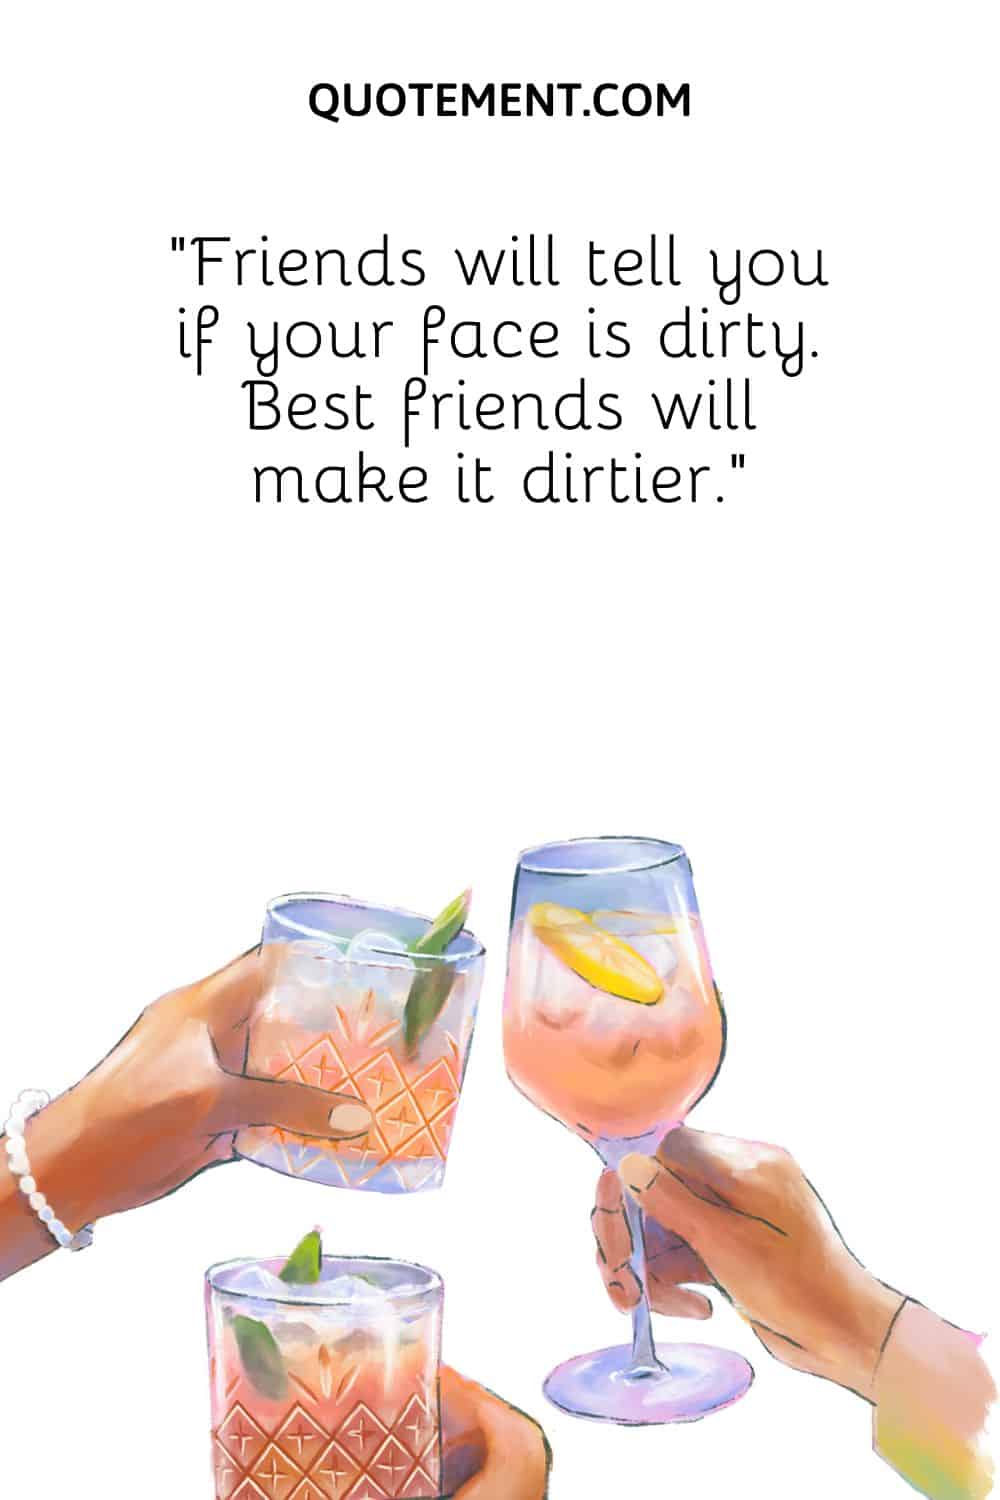 “Friends will tell you if your face is dirty. Best friends will make it dirtier.”